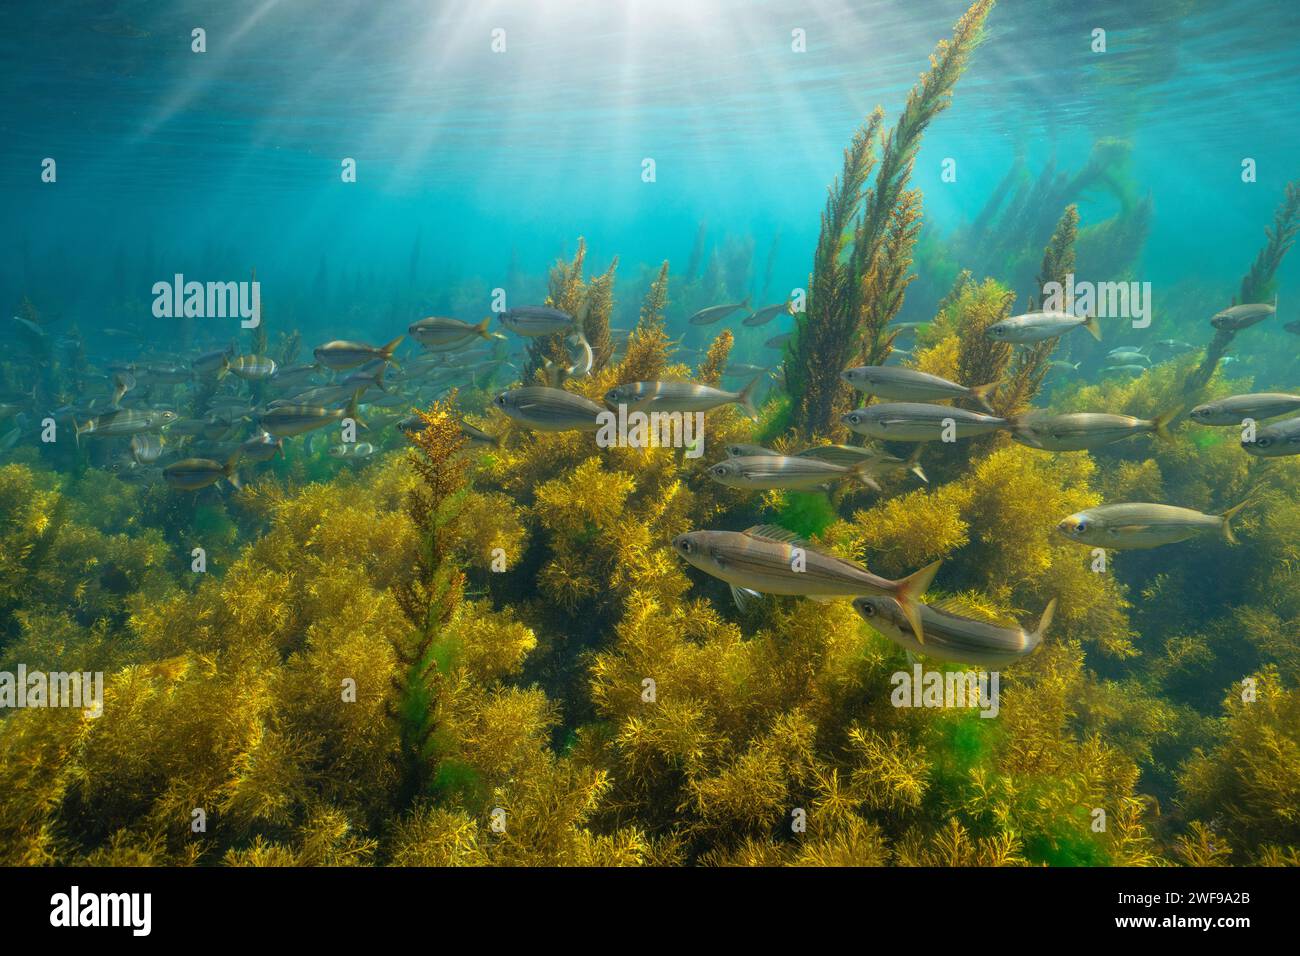 Seaweed with a shoal of fish (bogue) and sunlight underwater seascape in the Atlantic ocean, natural scene, Spain, Galicia, Rias Baixas Stock Photo